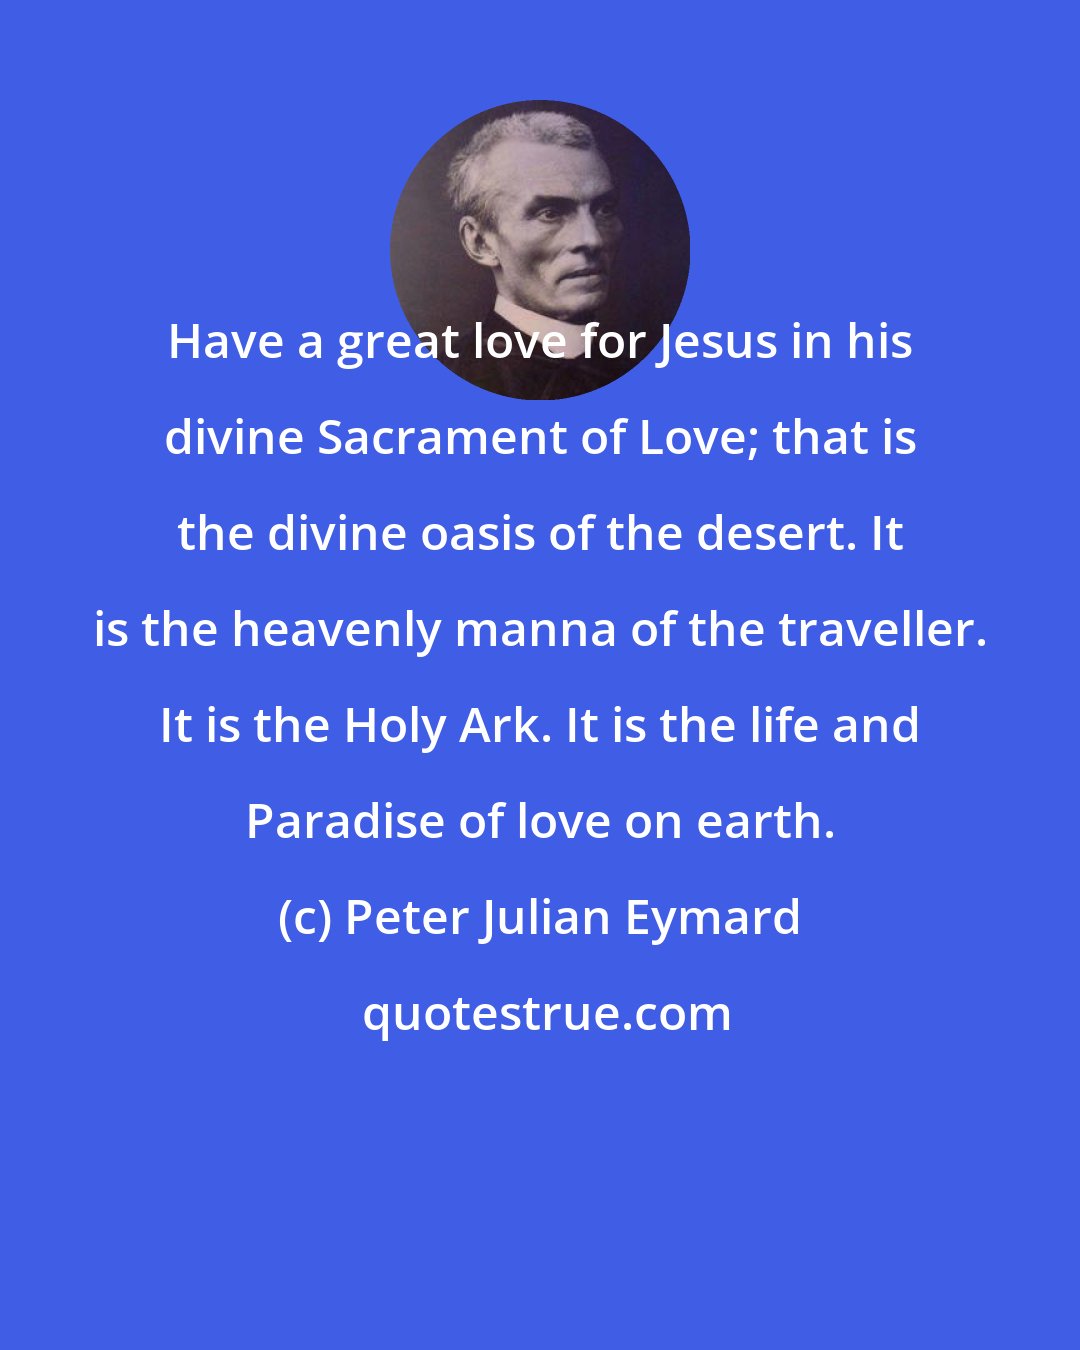 Peter Julian Eymard: Have a great love for Jesus in his divine Sacrament of Love; that is the divine oasis of the desert. It is the heavenly manna of the traveller. It is the Holy Ark. It is the life and Paradise of love on earth.